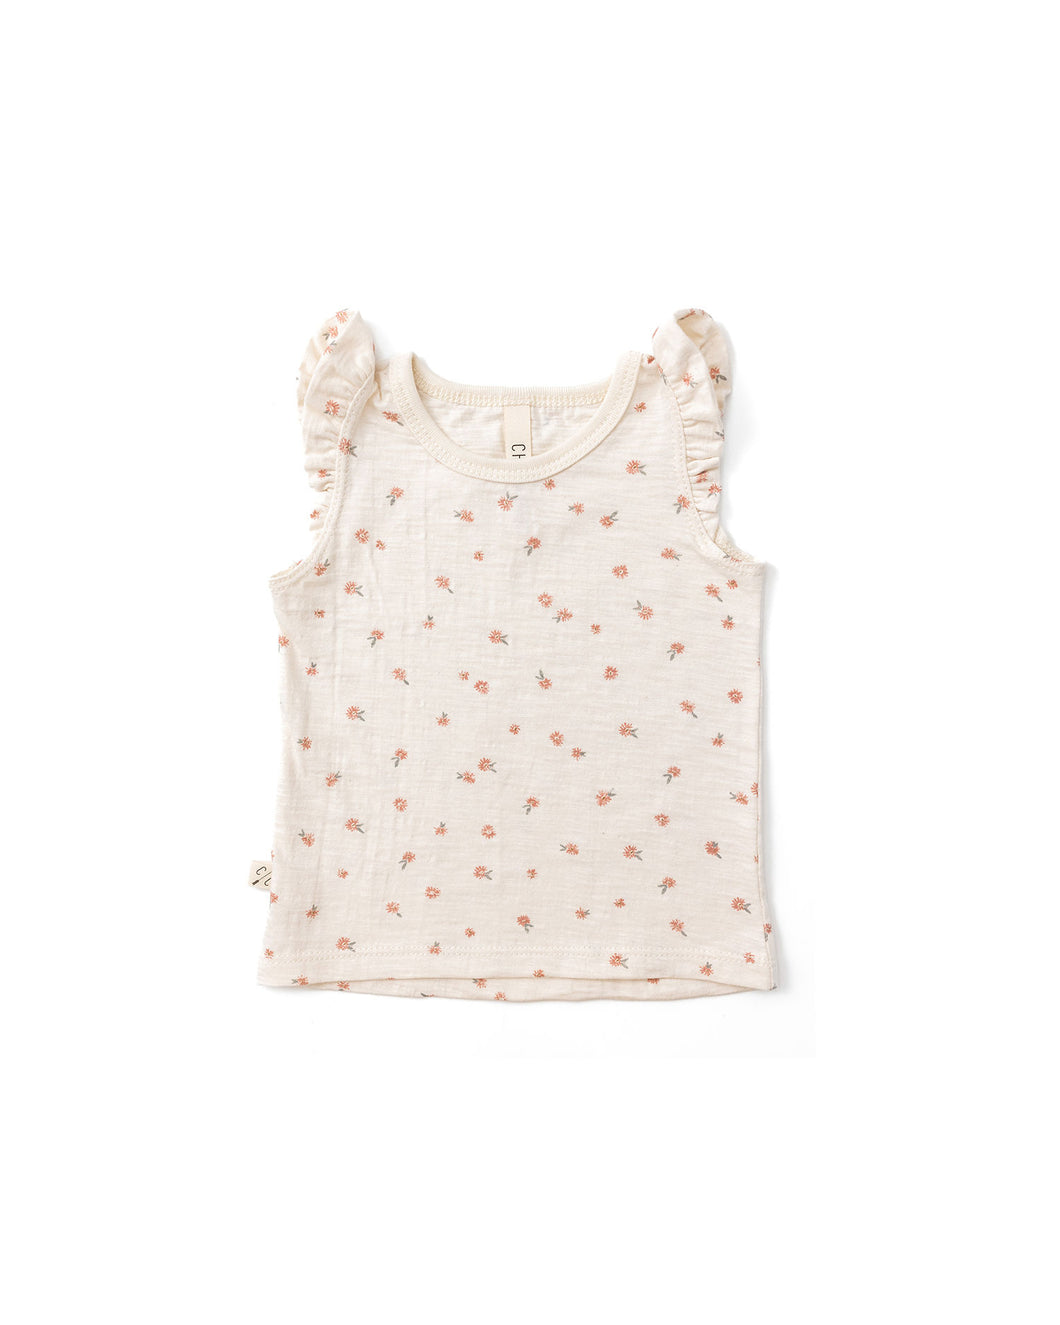 flutter tee - daisies on natural